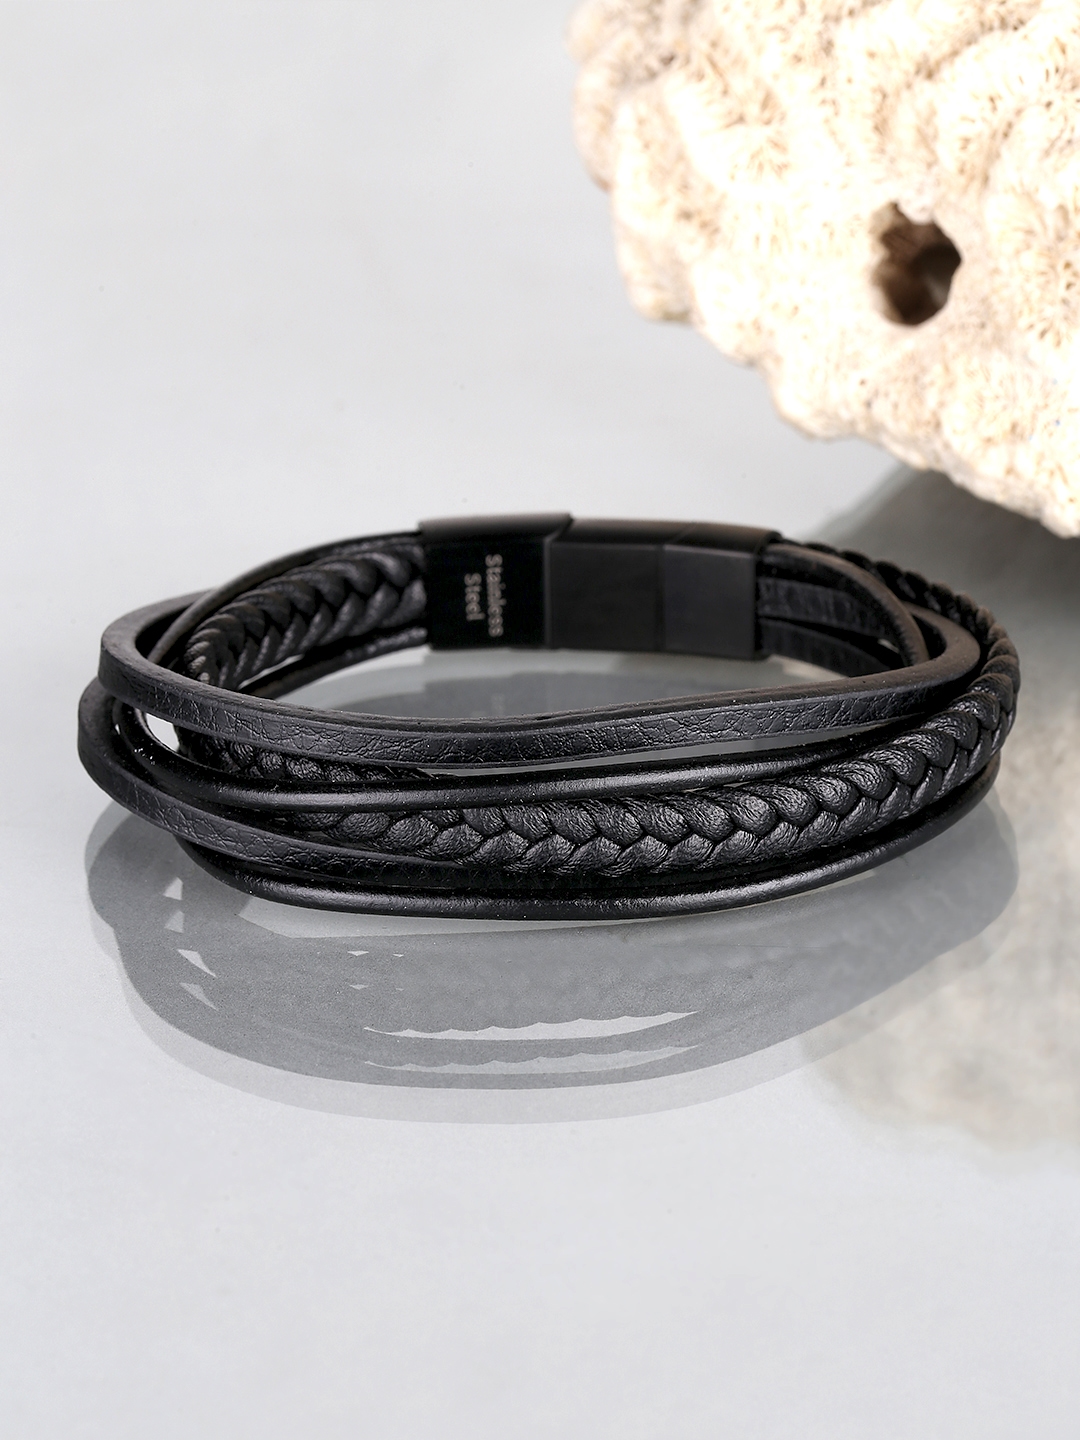 Stainless Steel Men Bracelet Retro Viking Leather Metal Bracelets  Motorcycle Accessories Wholesale Fashion Charm Jewelry Gifts - AliExpress